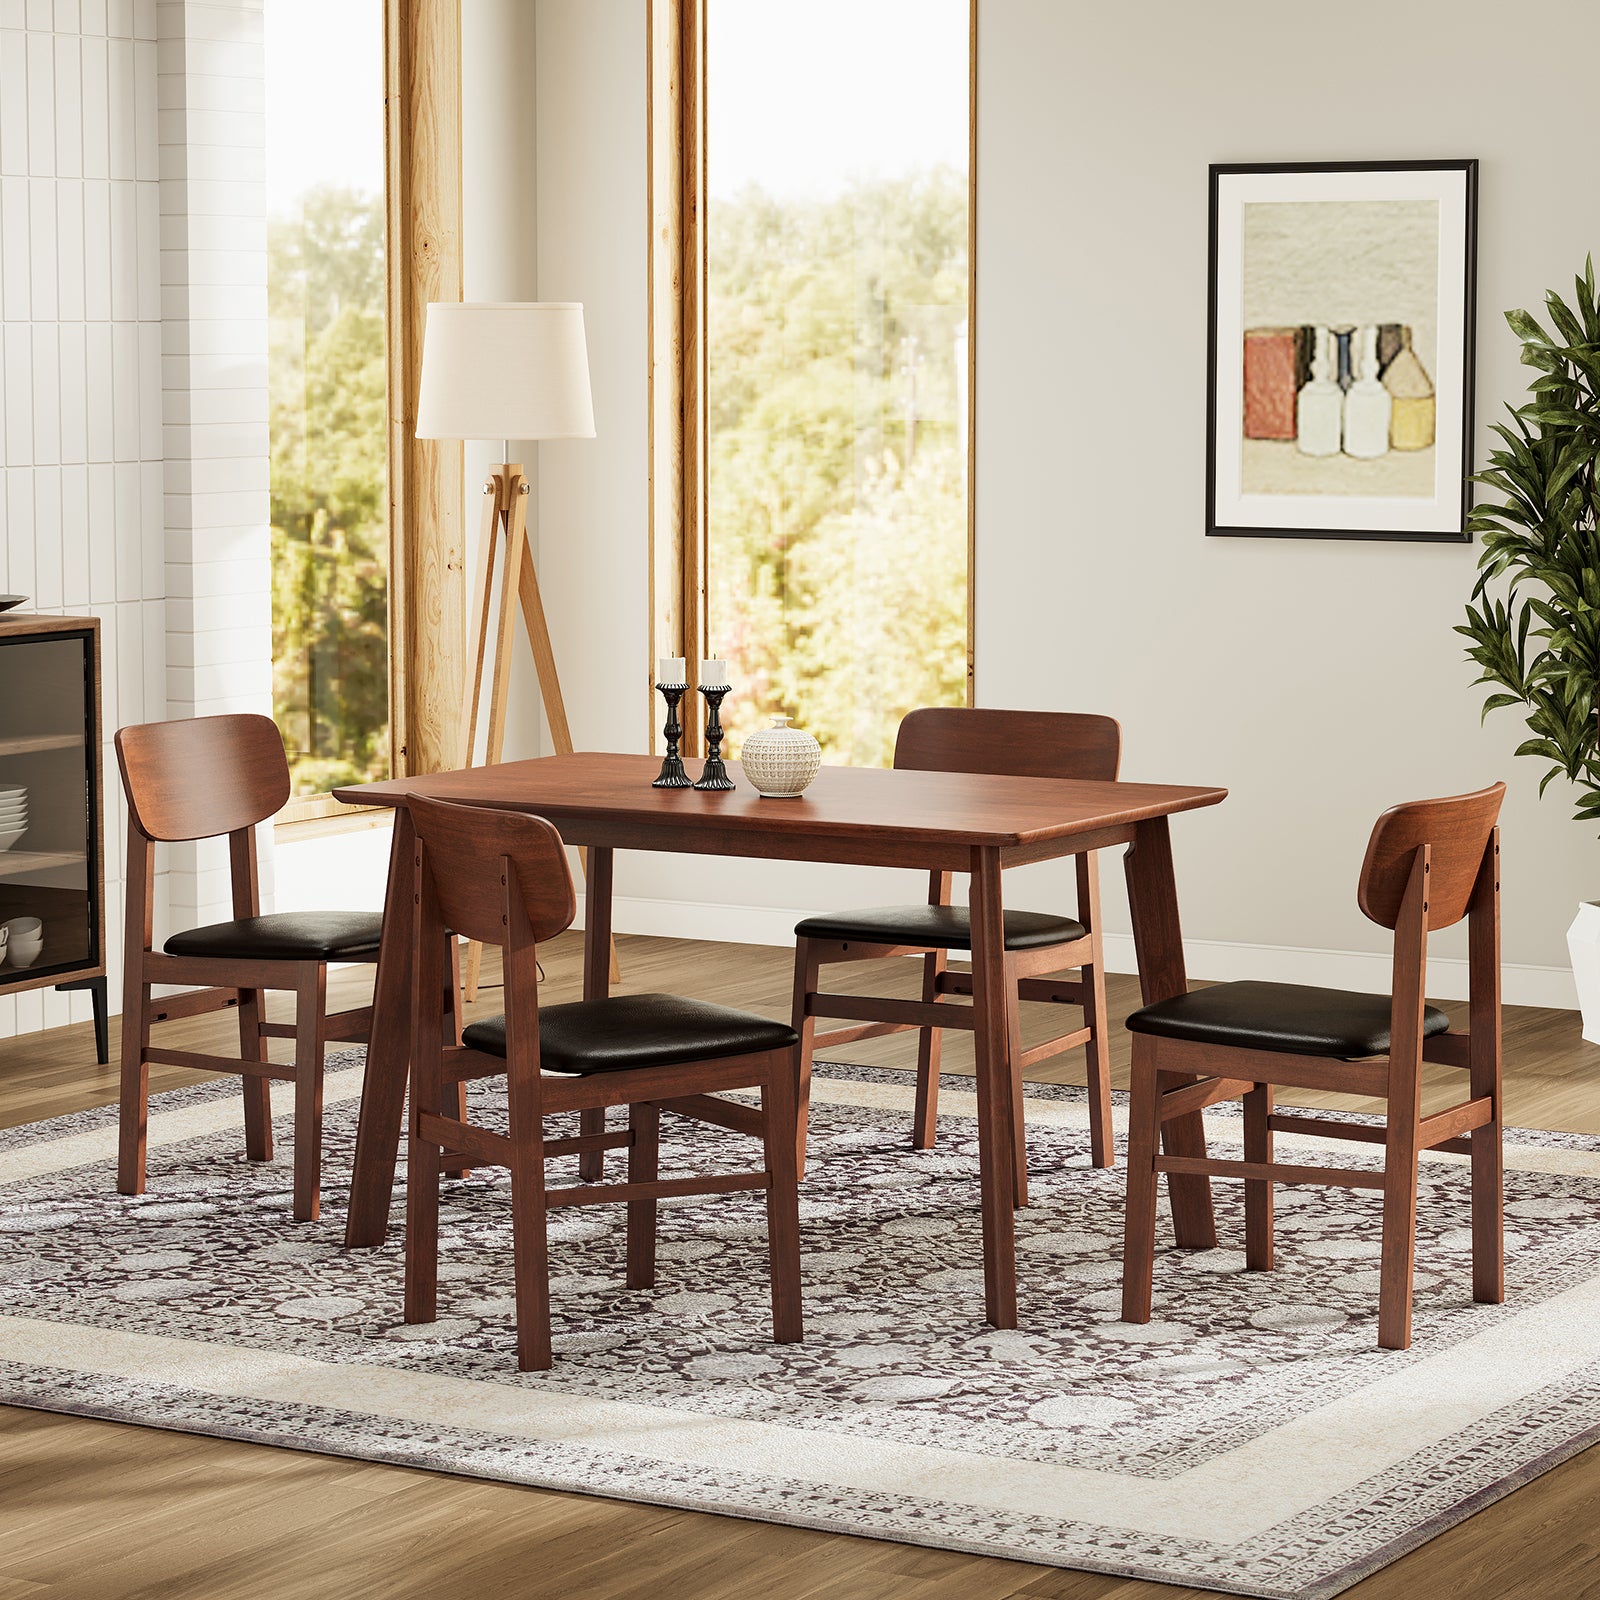 Oslo Brown Solid Wood 5pc Dining Set Table and 4 Chairs